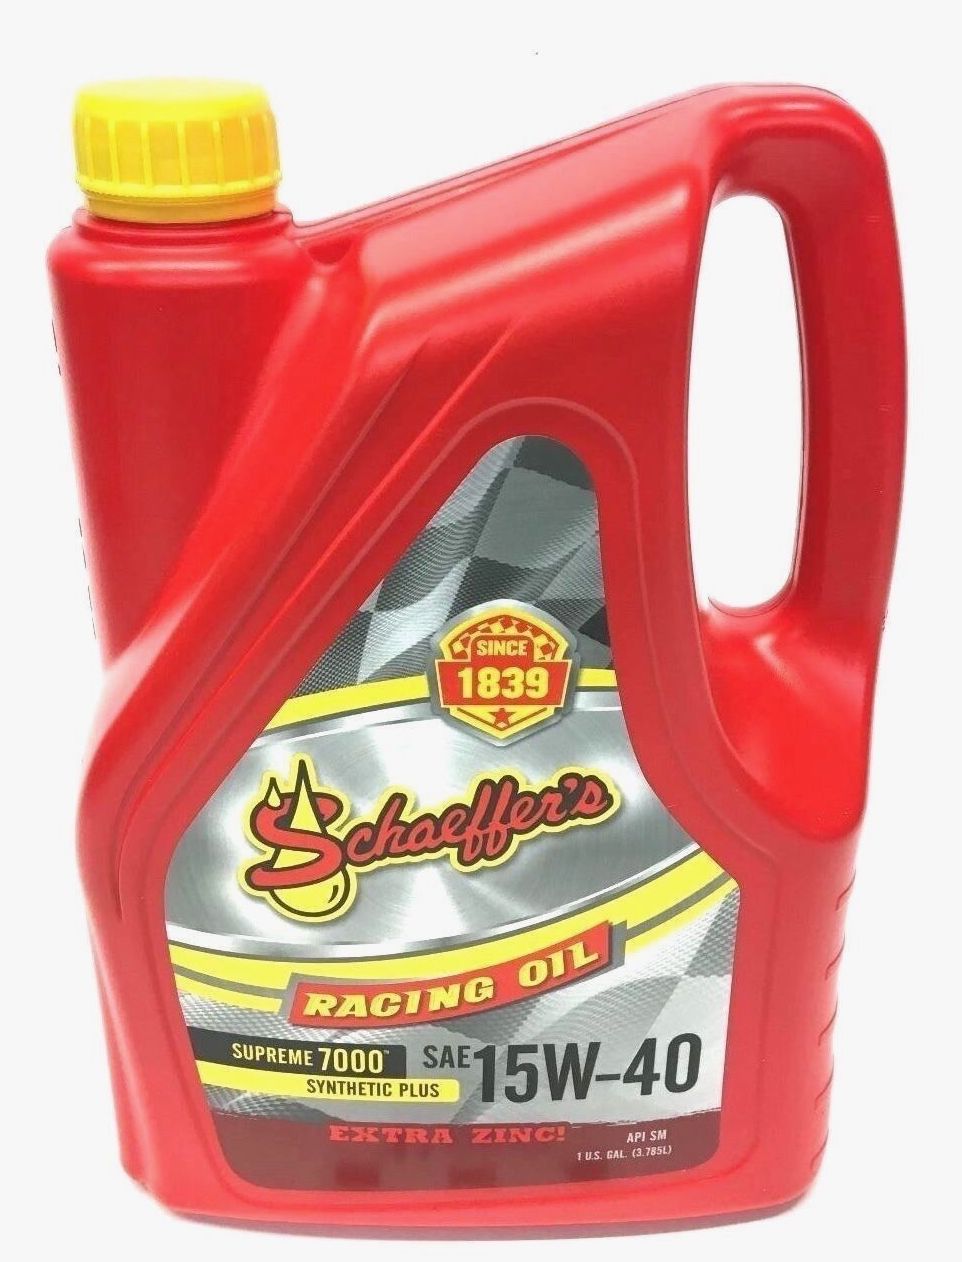 Schaeffer's Racing Oil 0708-006S Supreme 7000 Synthetic Plus SAE 15W-40 - 1 gallon